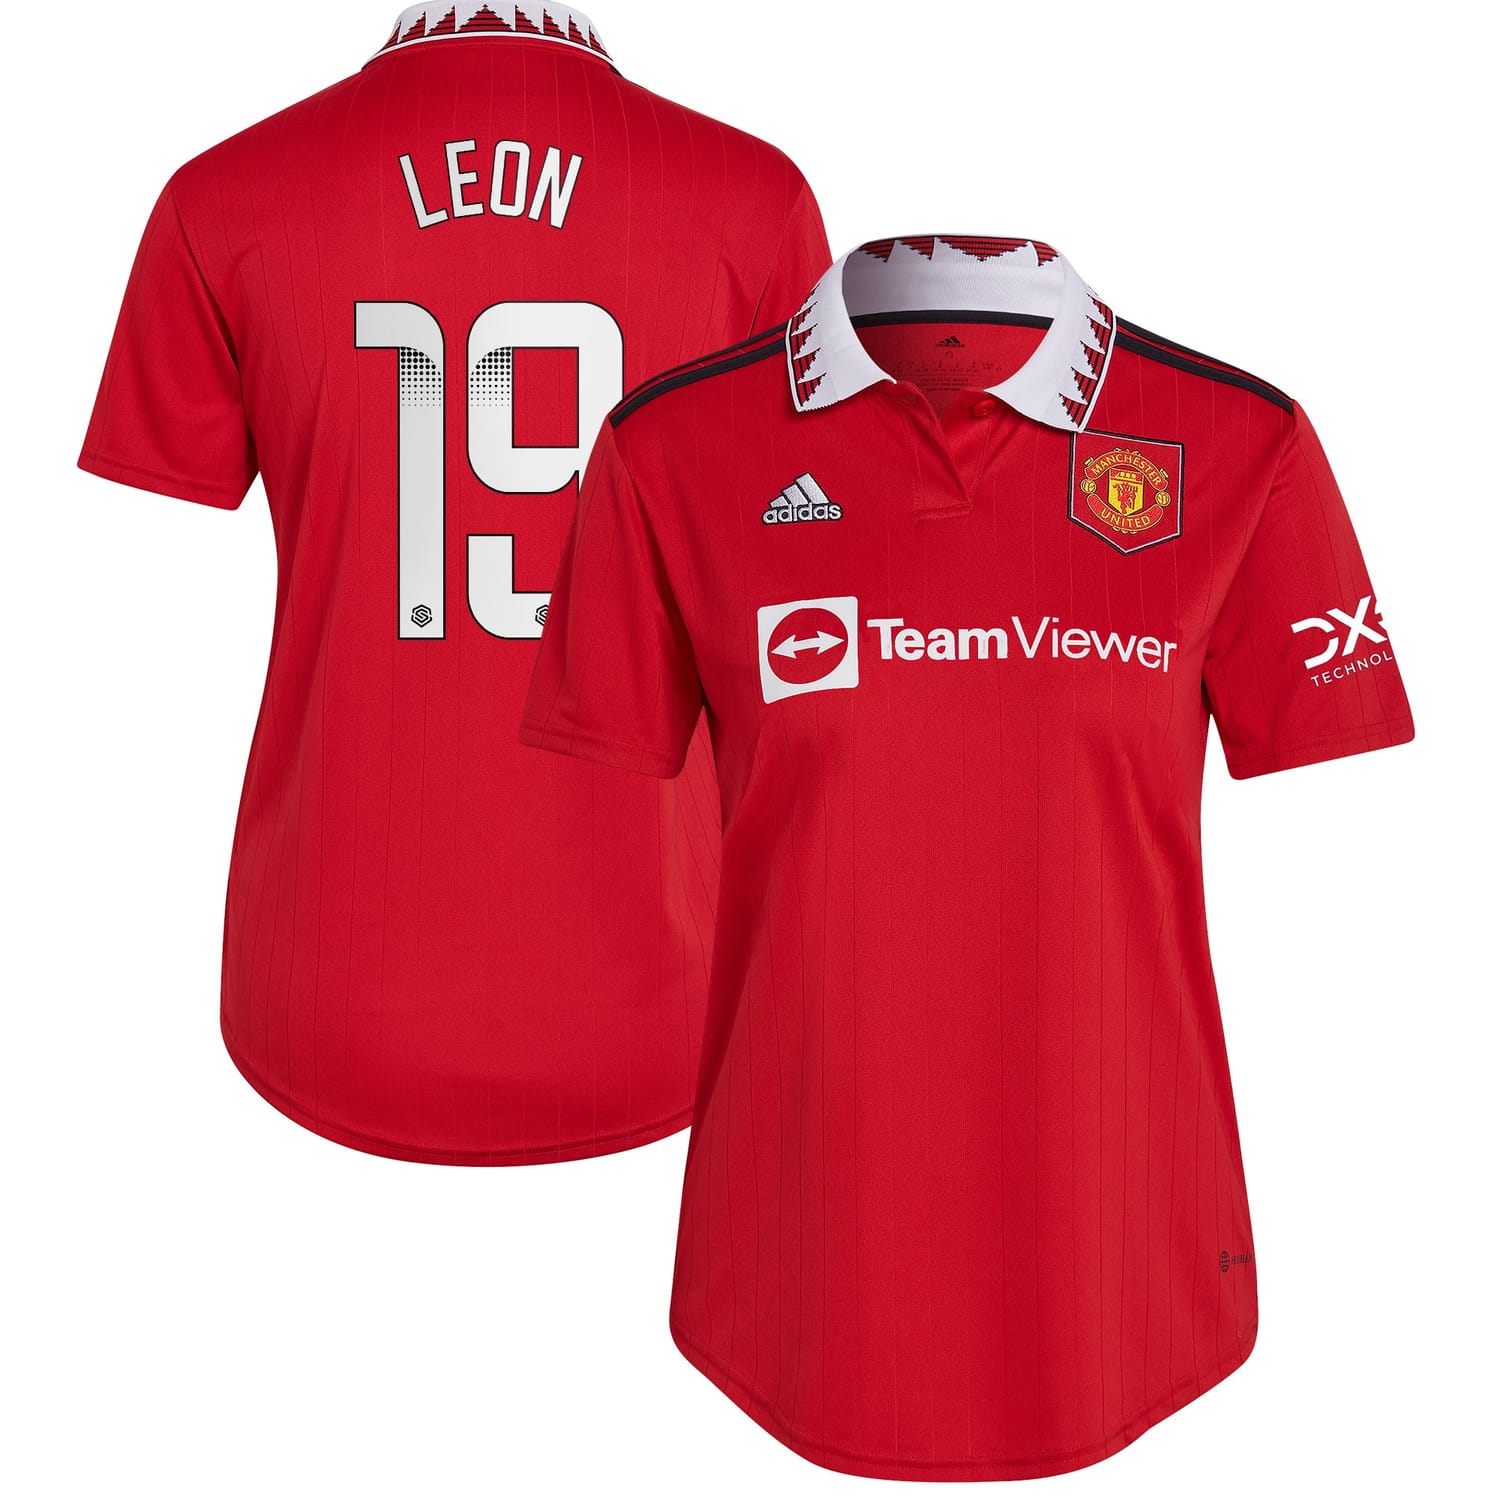 Premier League Manchester United Home WSL Jersey Shirt 2022-23 player Adriana Leon 19 printing for Women